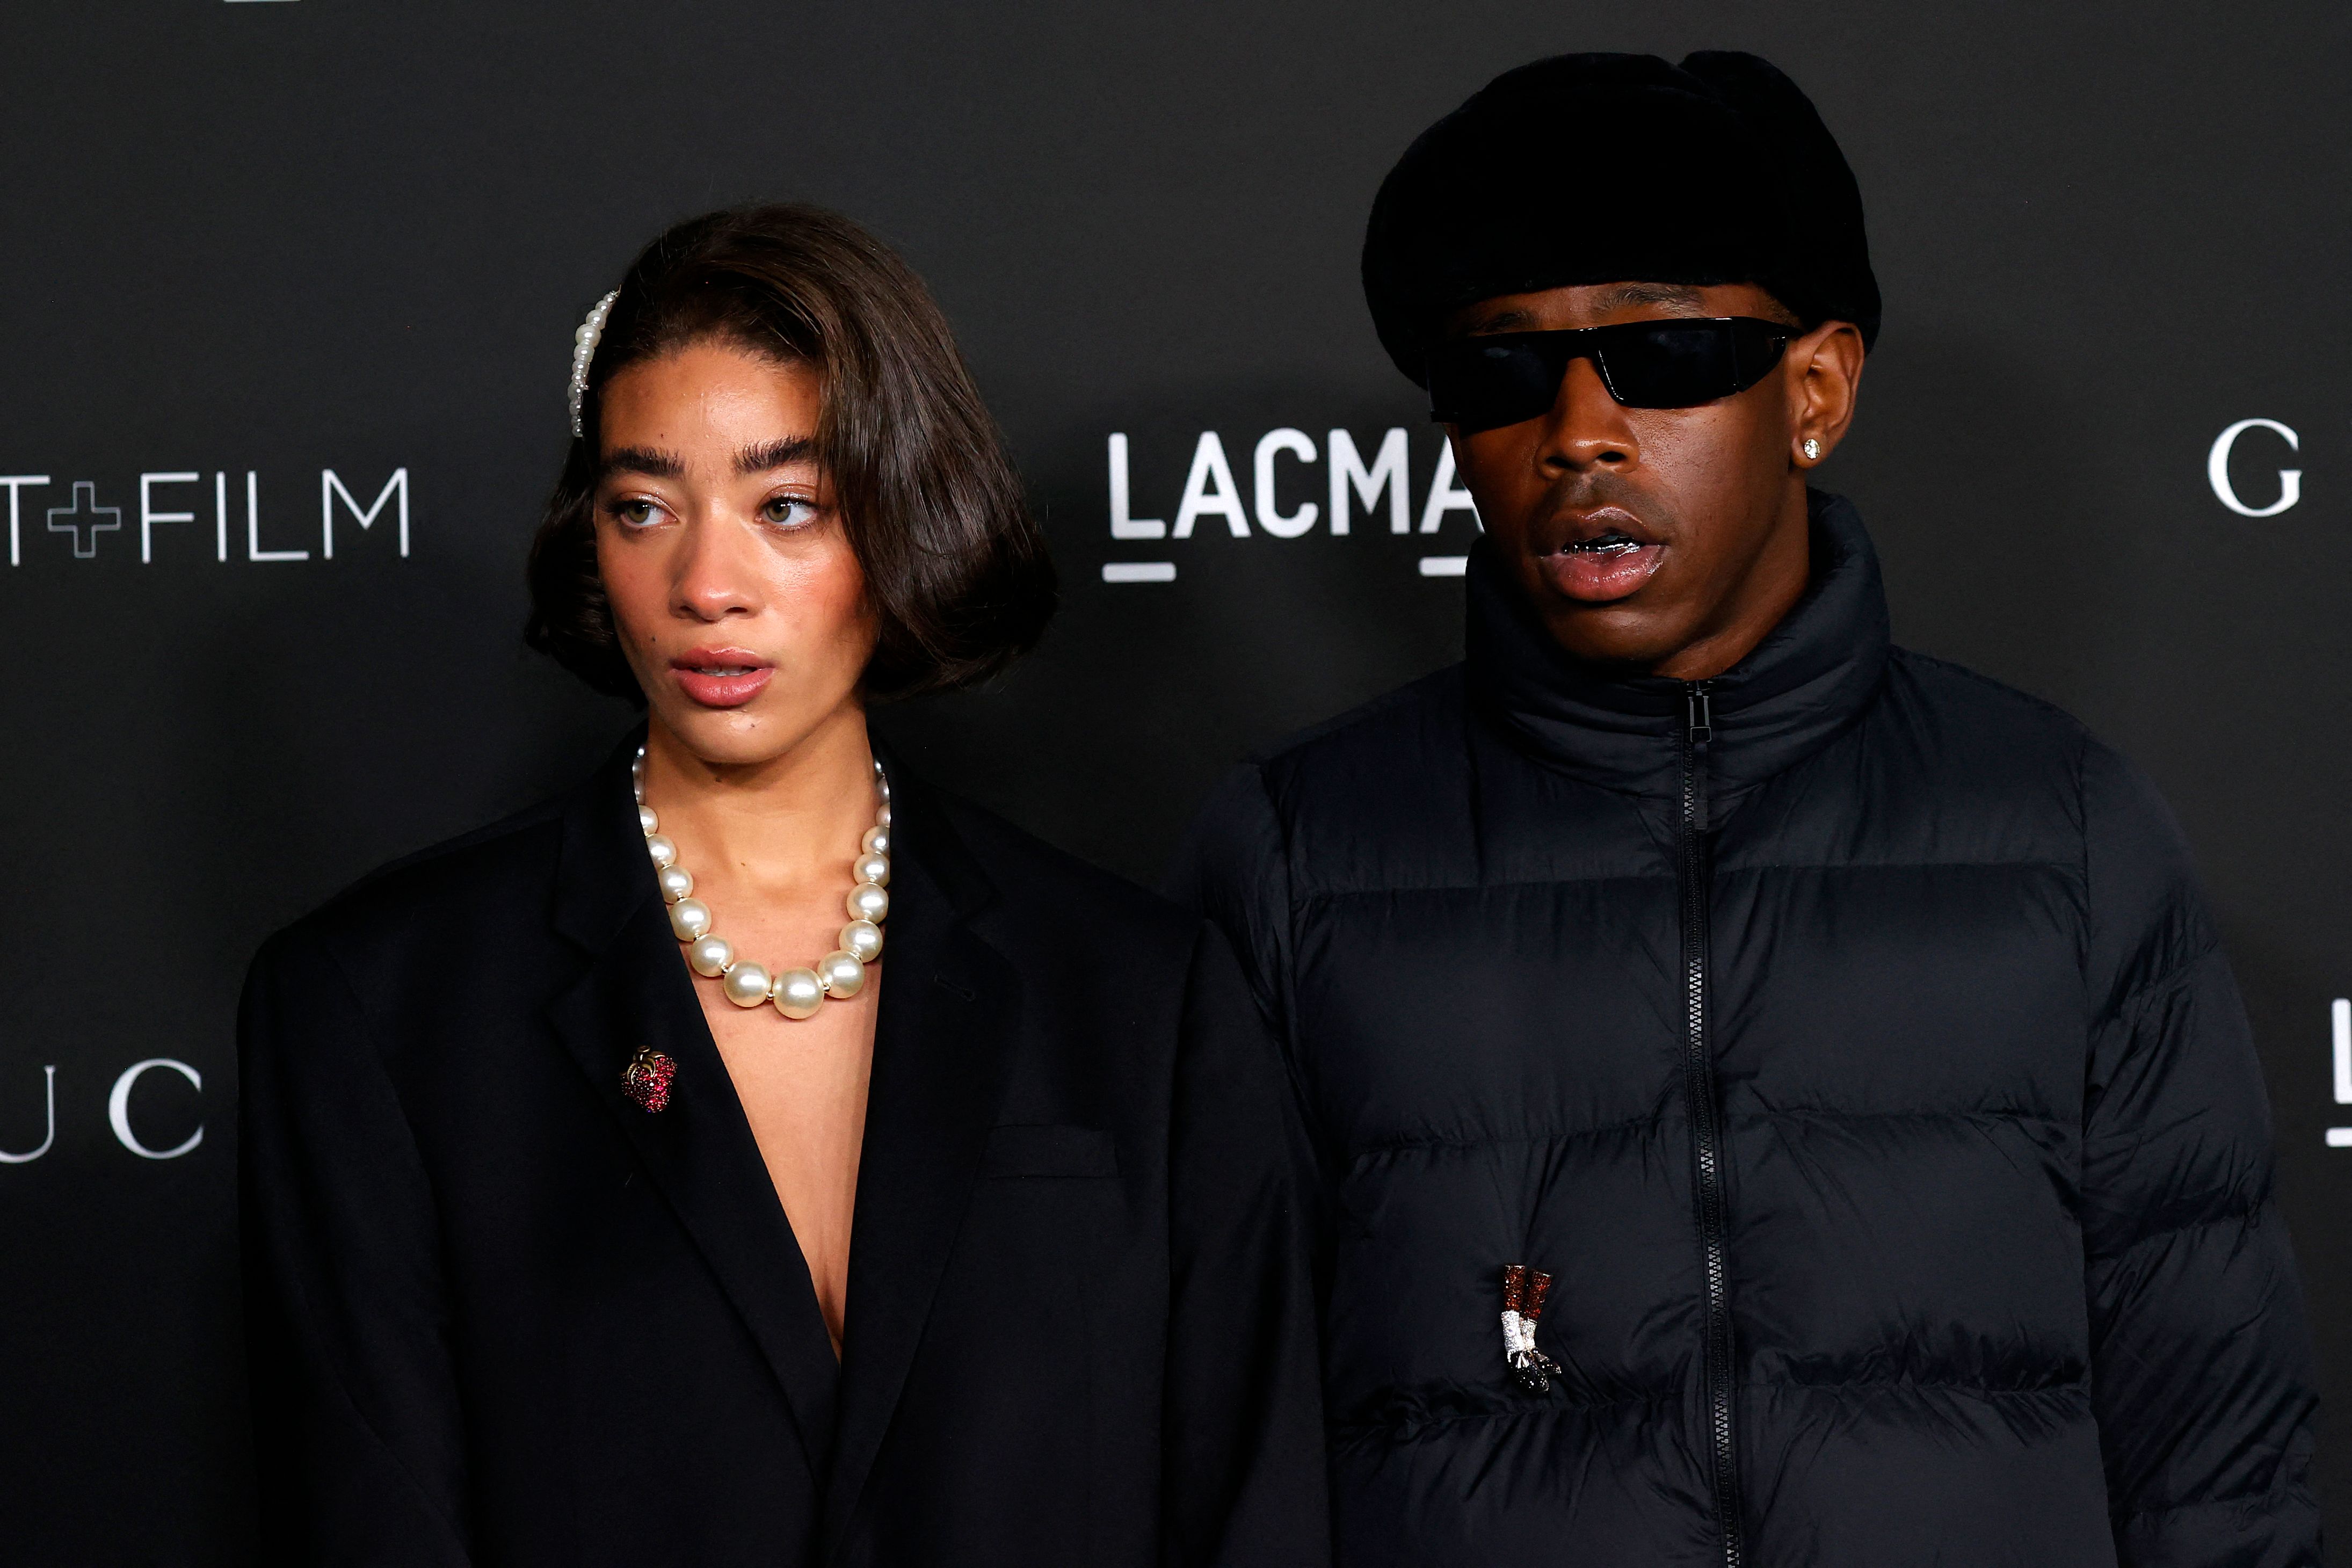 Tyler, the Creator arrive for the 10th annual LACMA Art+Film gala at the Los Angeles County Museum of Art on on November 6, 2021, in Los Angeles, California. | Source: Getty Images